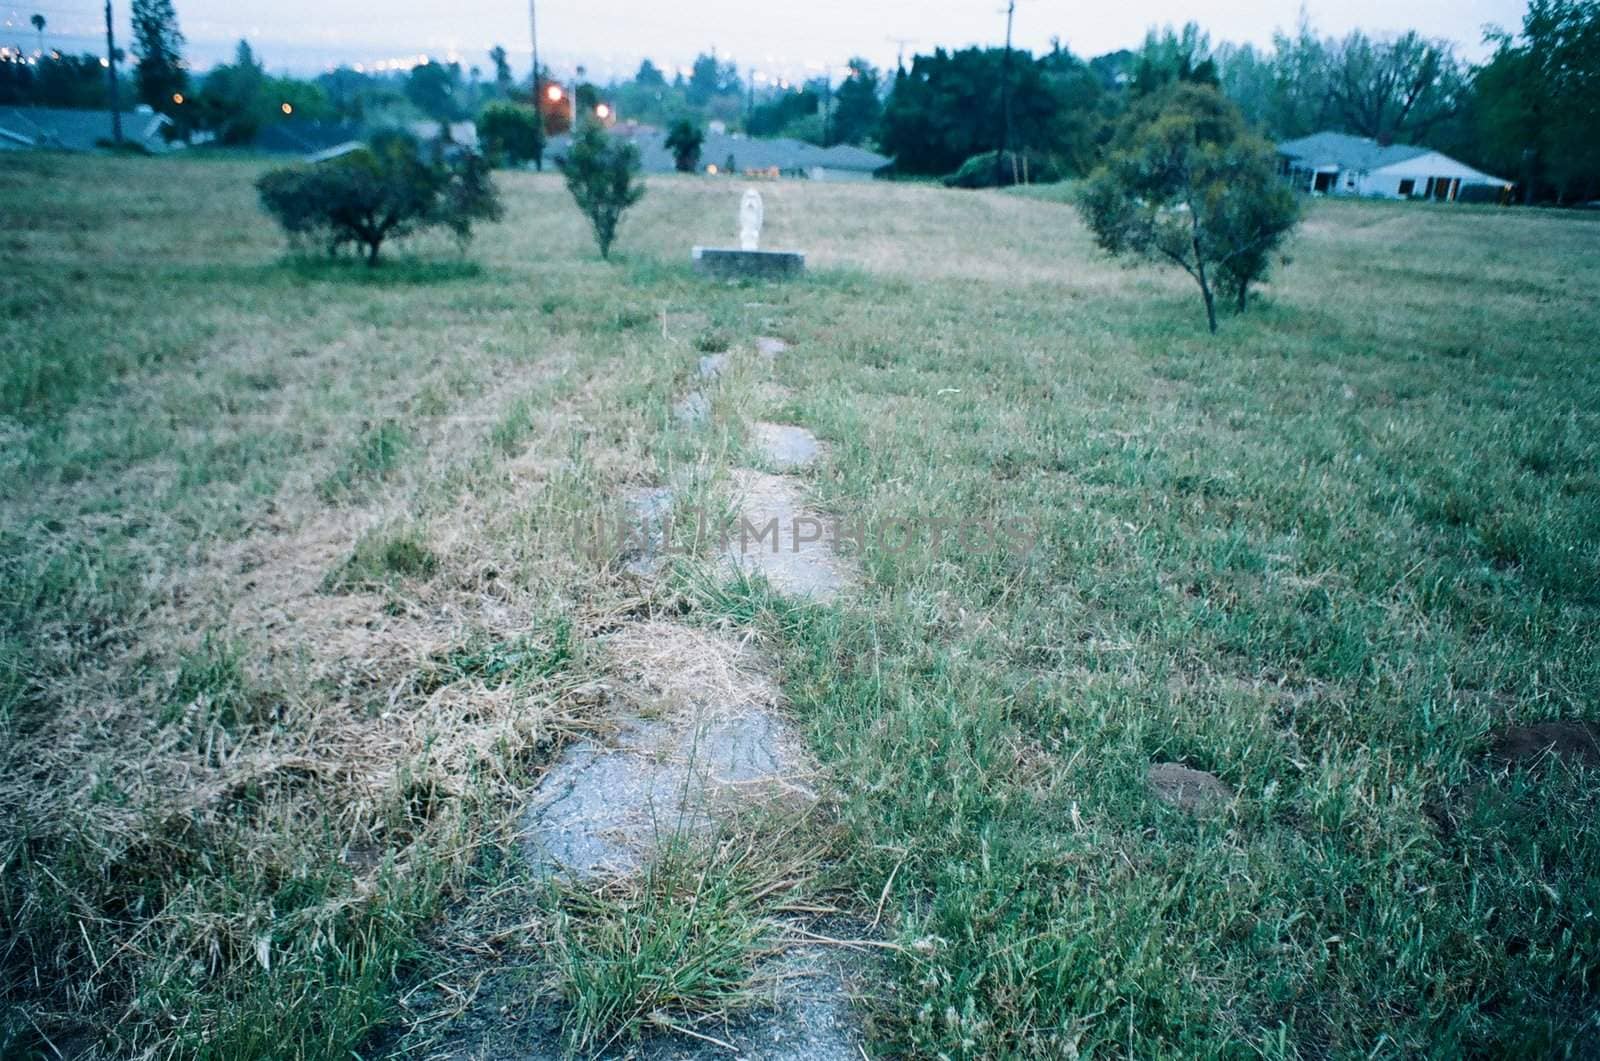 An old foot path leading to a statue of Mary